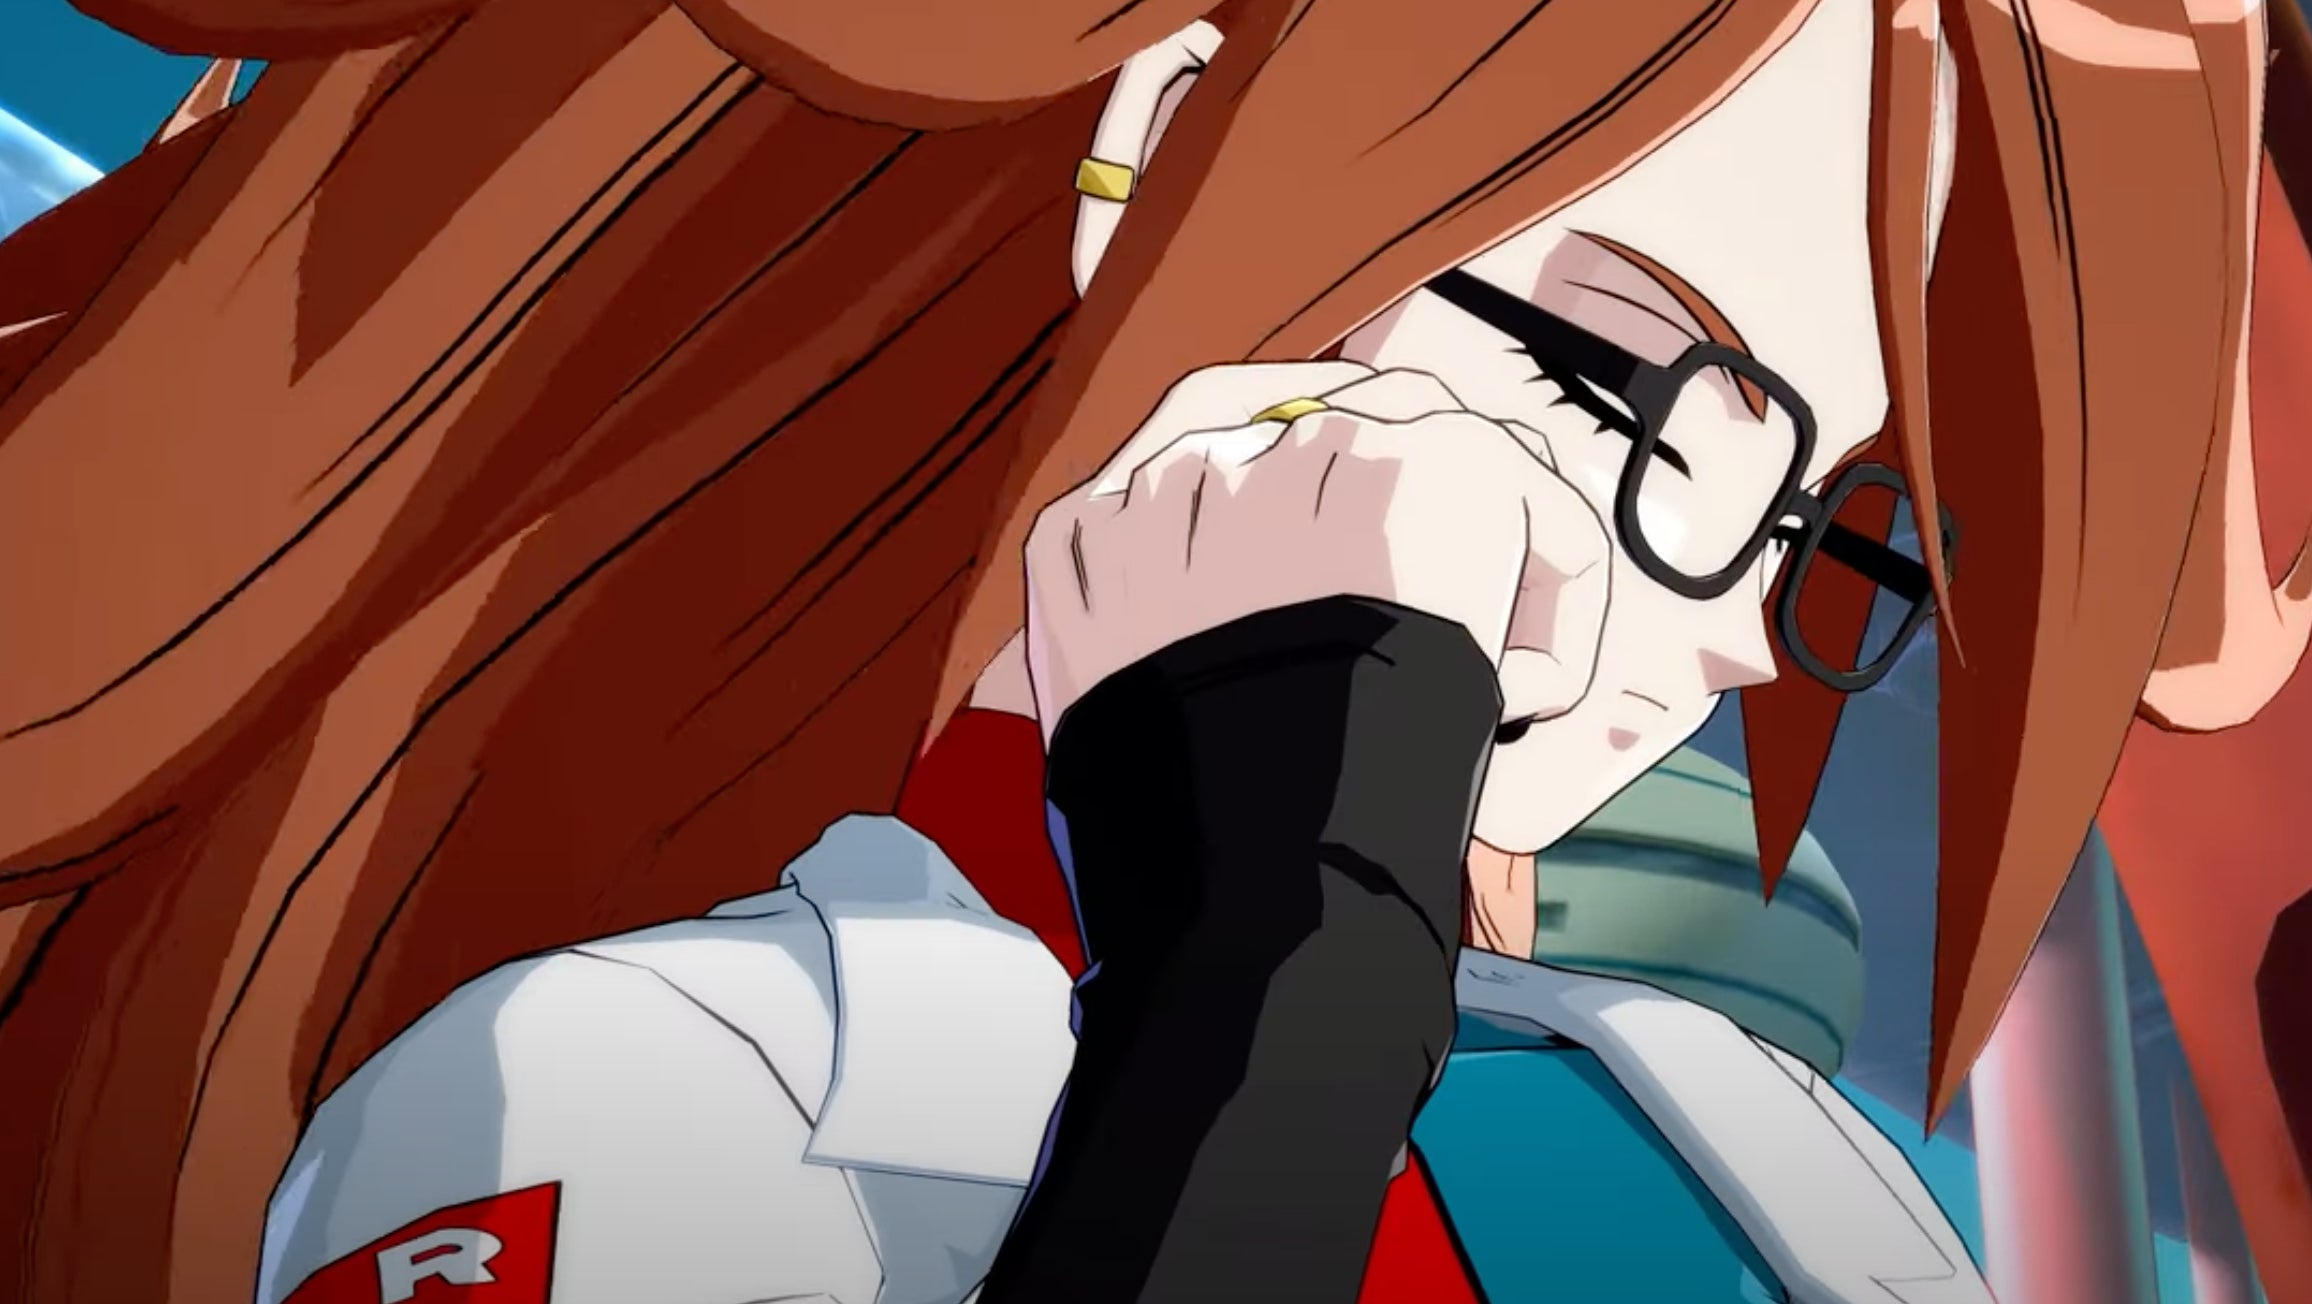 Android 21 (Lab Coat) is coming to Dragon Ball FighterZ 